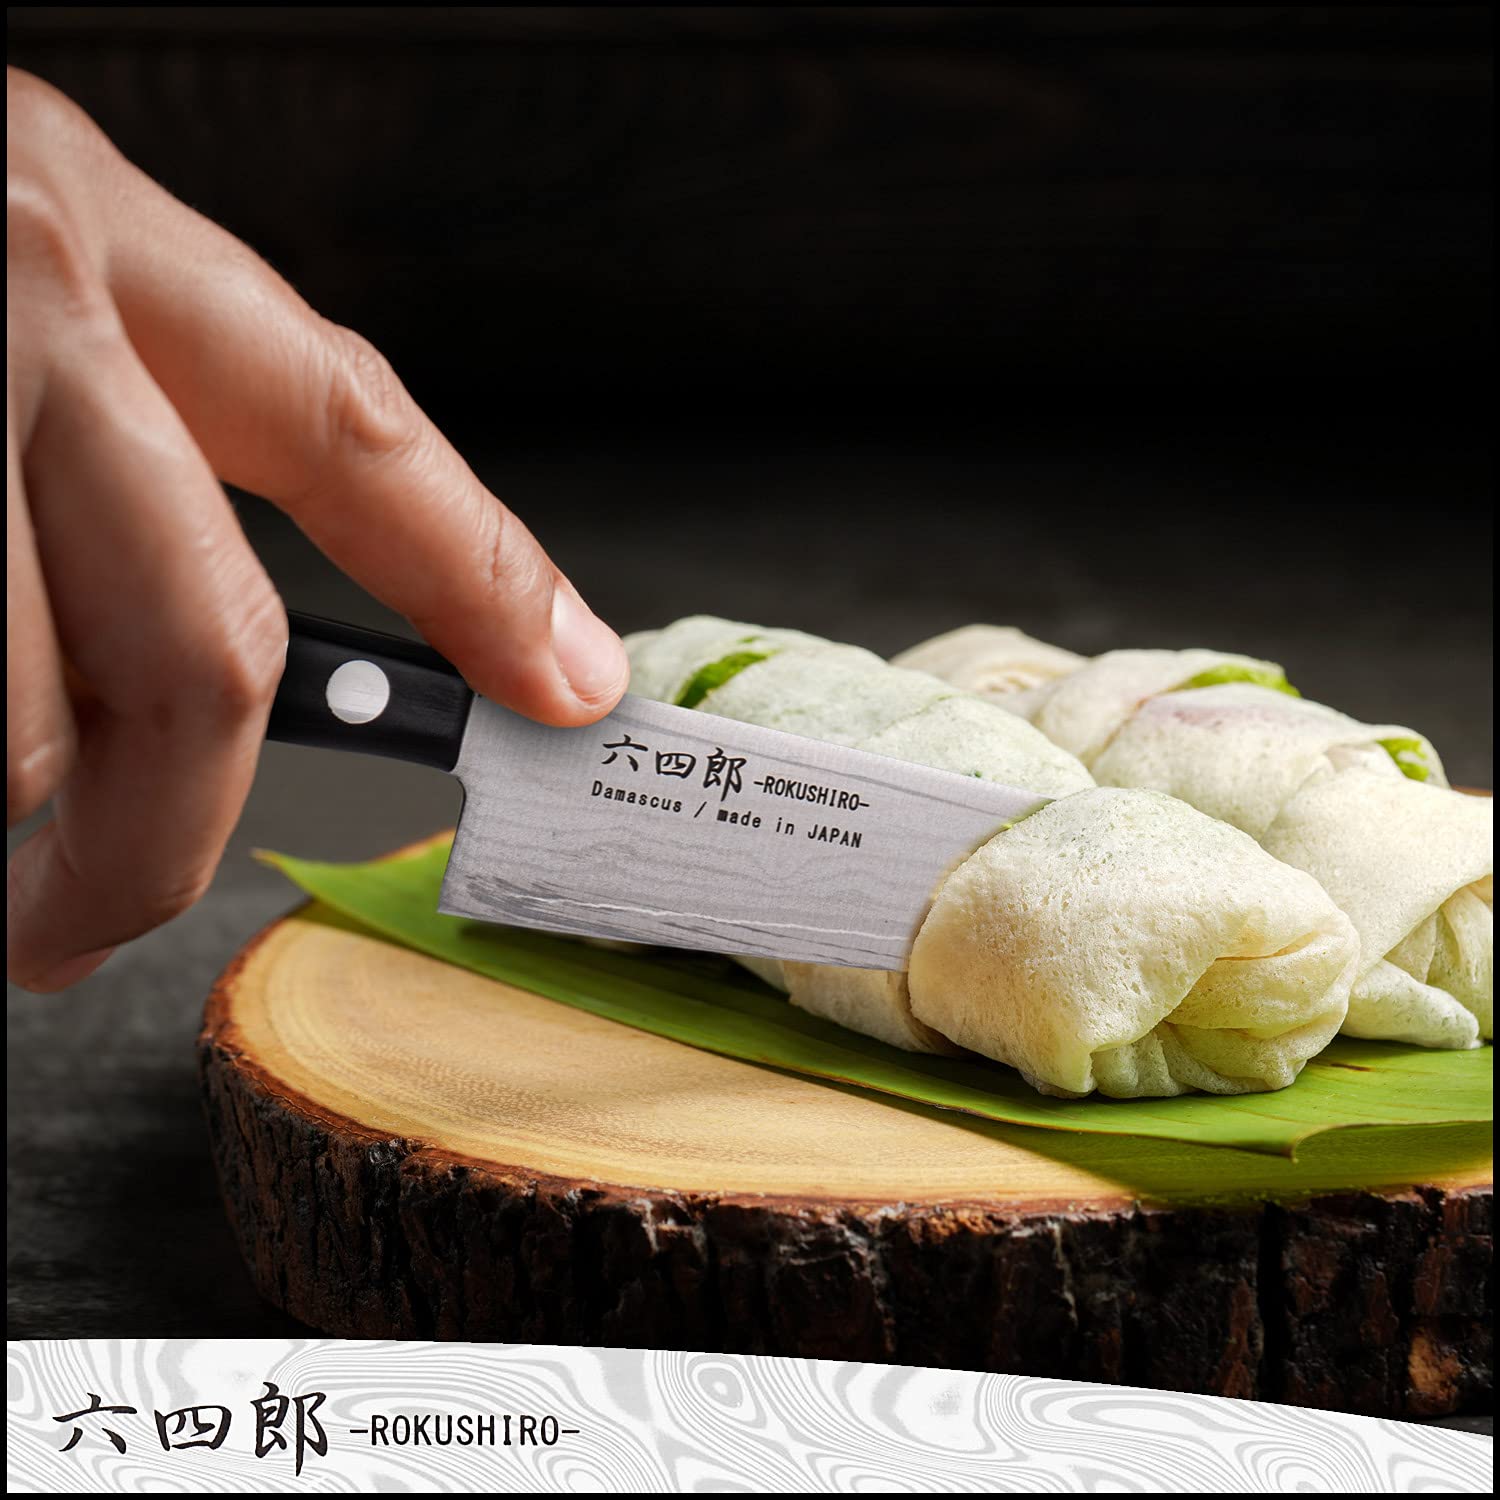 ROKUSHIRO Petty Knife 5.3-Inch (135mm), 37-Layer VG10 Damascus Hammered Kitchen Chef Knife, High Carbon Stainless Steel Forged Blade